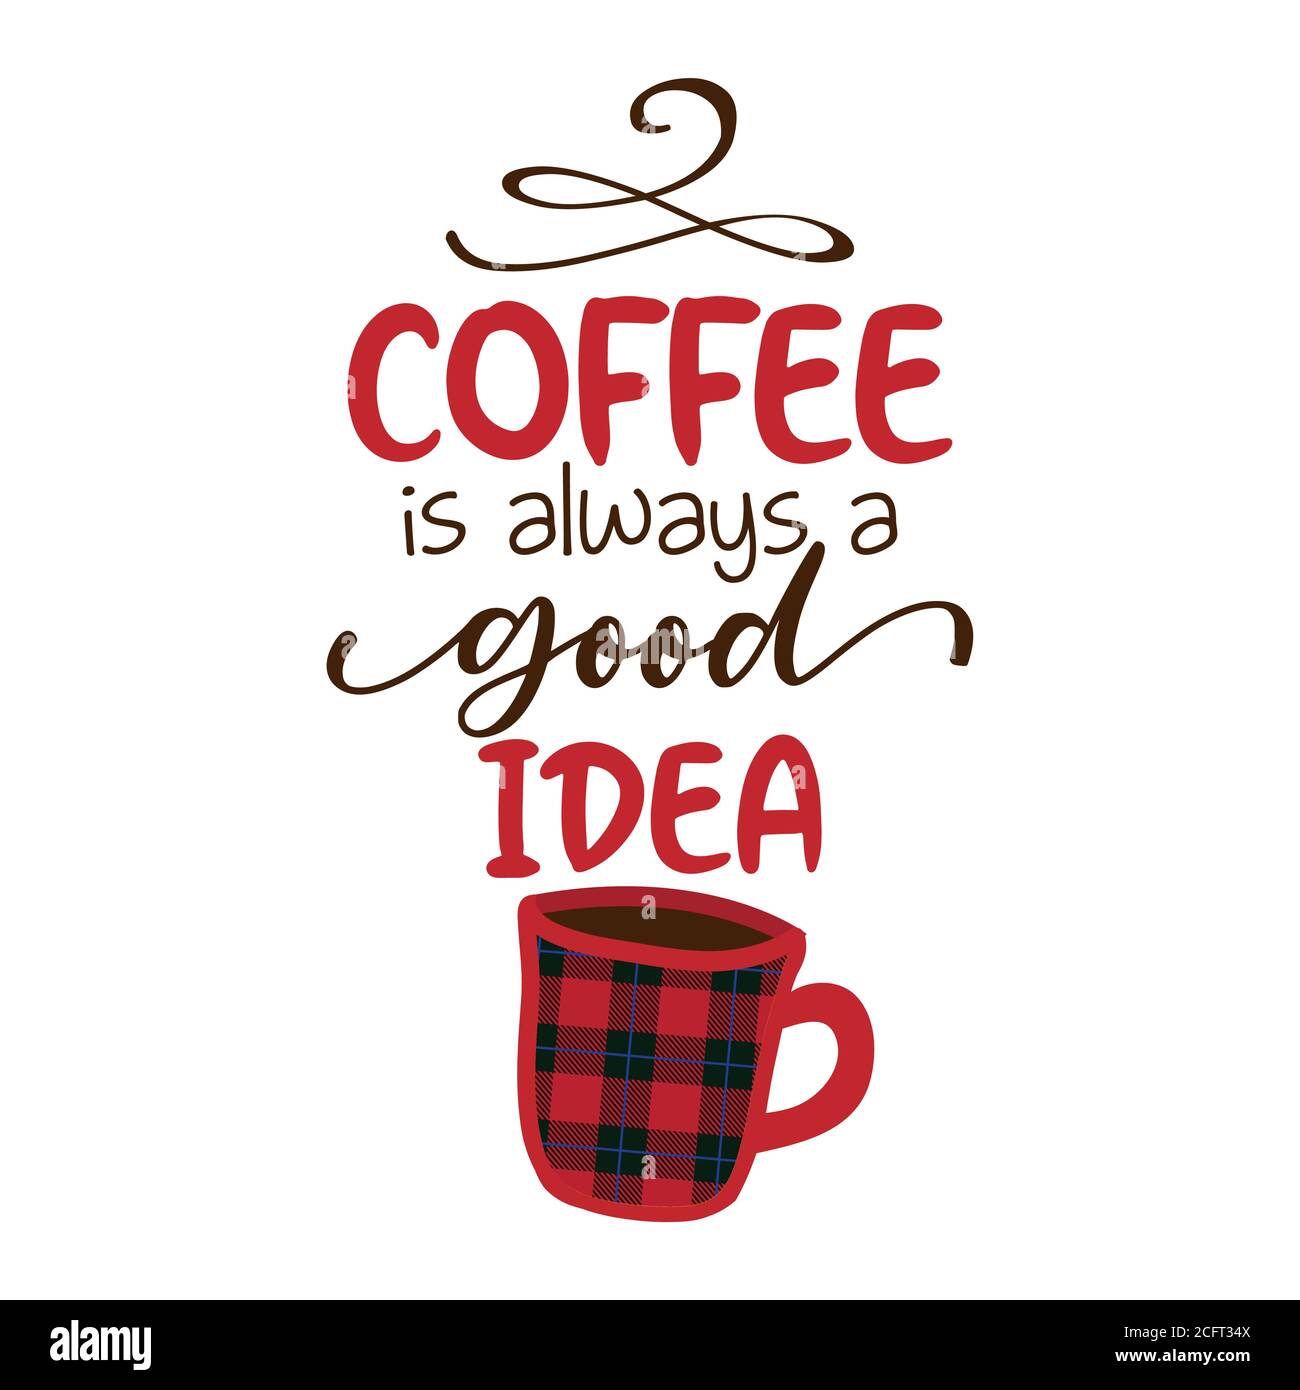 Coffee is always a good idea - Funny saying for busy mothers with coffee cup. Good for scrap booking, motivation posters, textiles, gifts, bar sets. Stock Vector